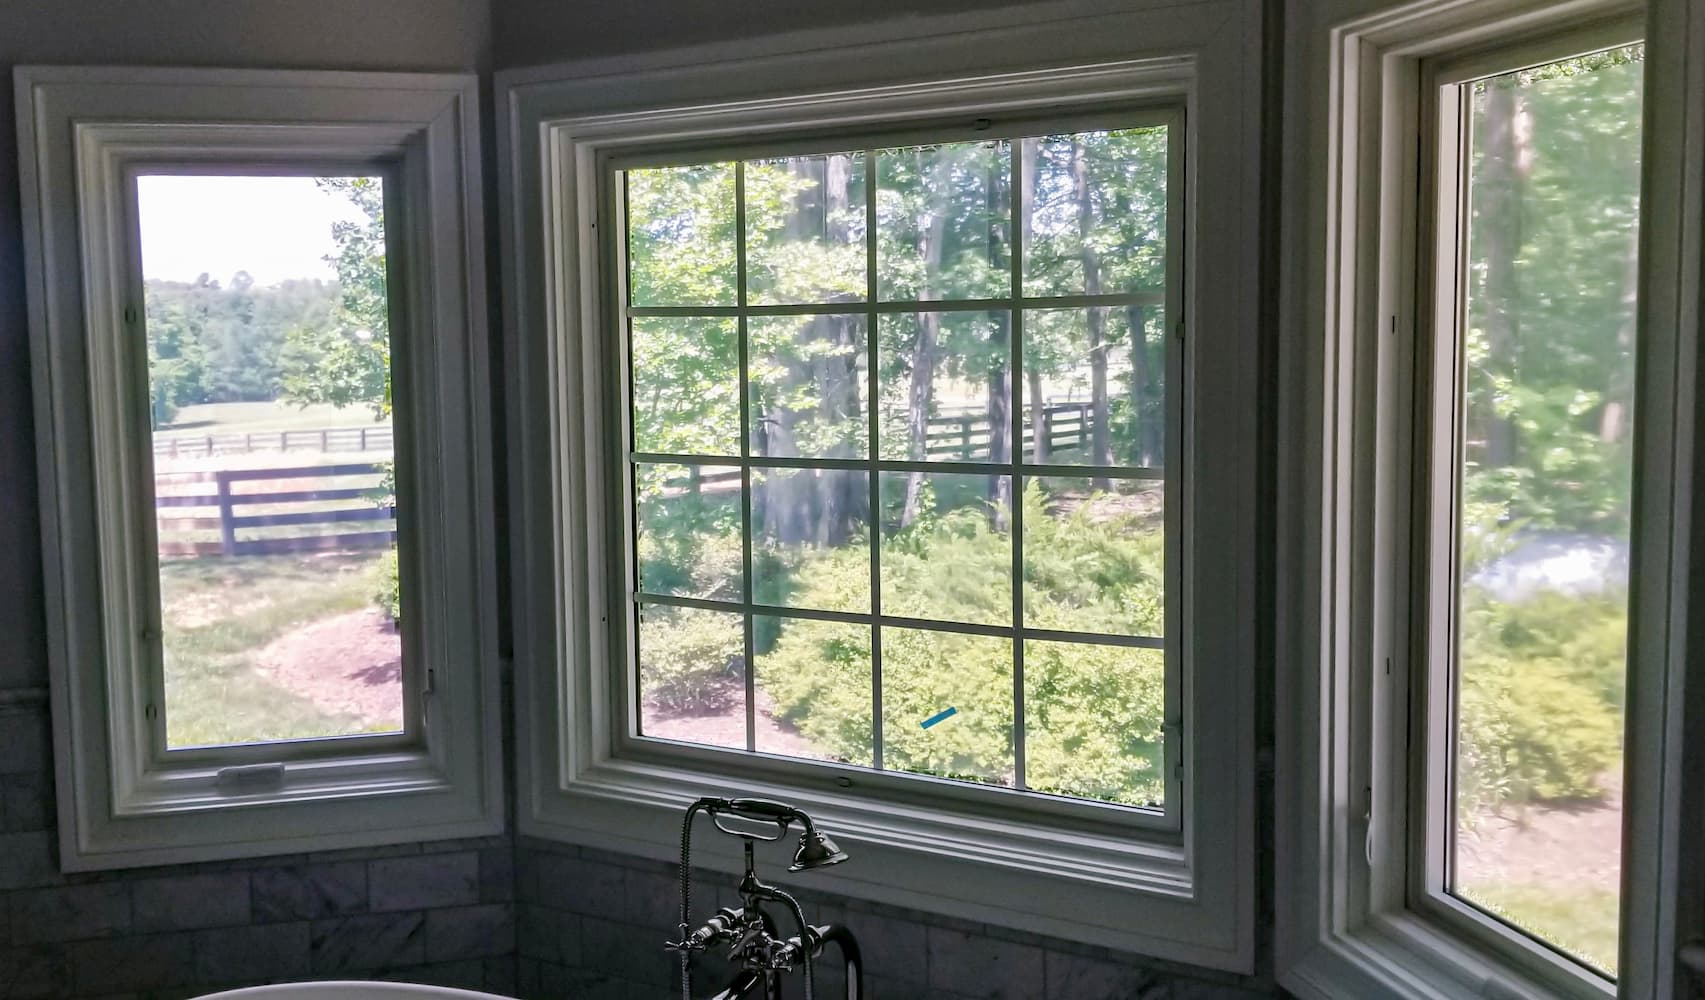 Two wood casement windows flanking a wood picture window with traditional grille pattern